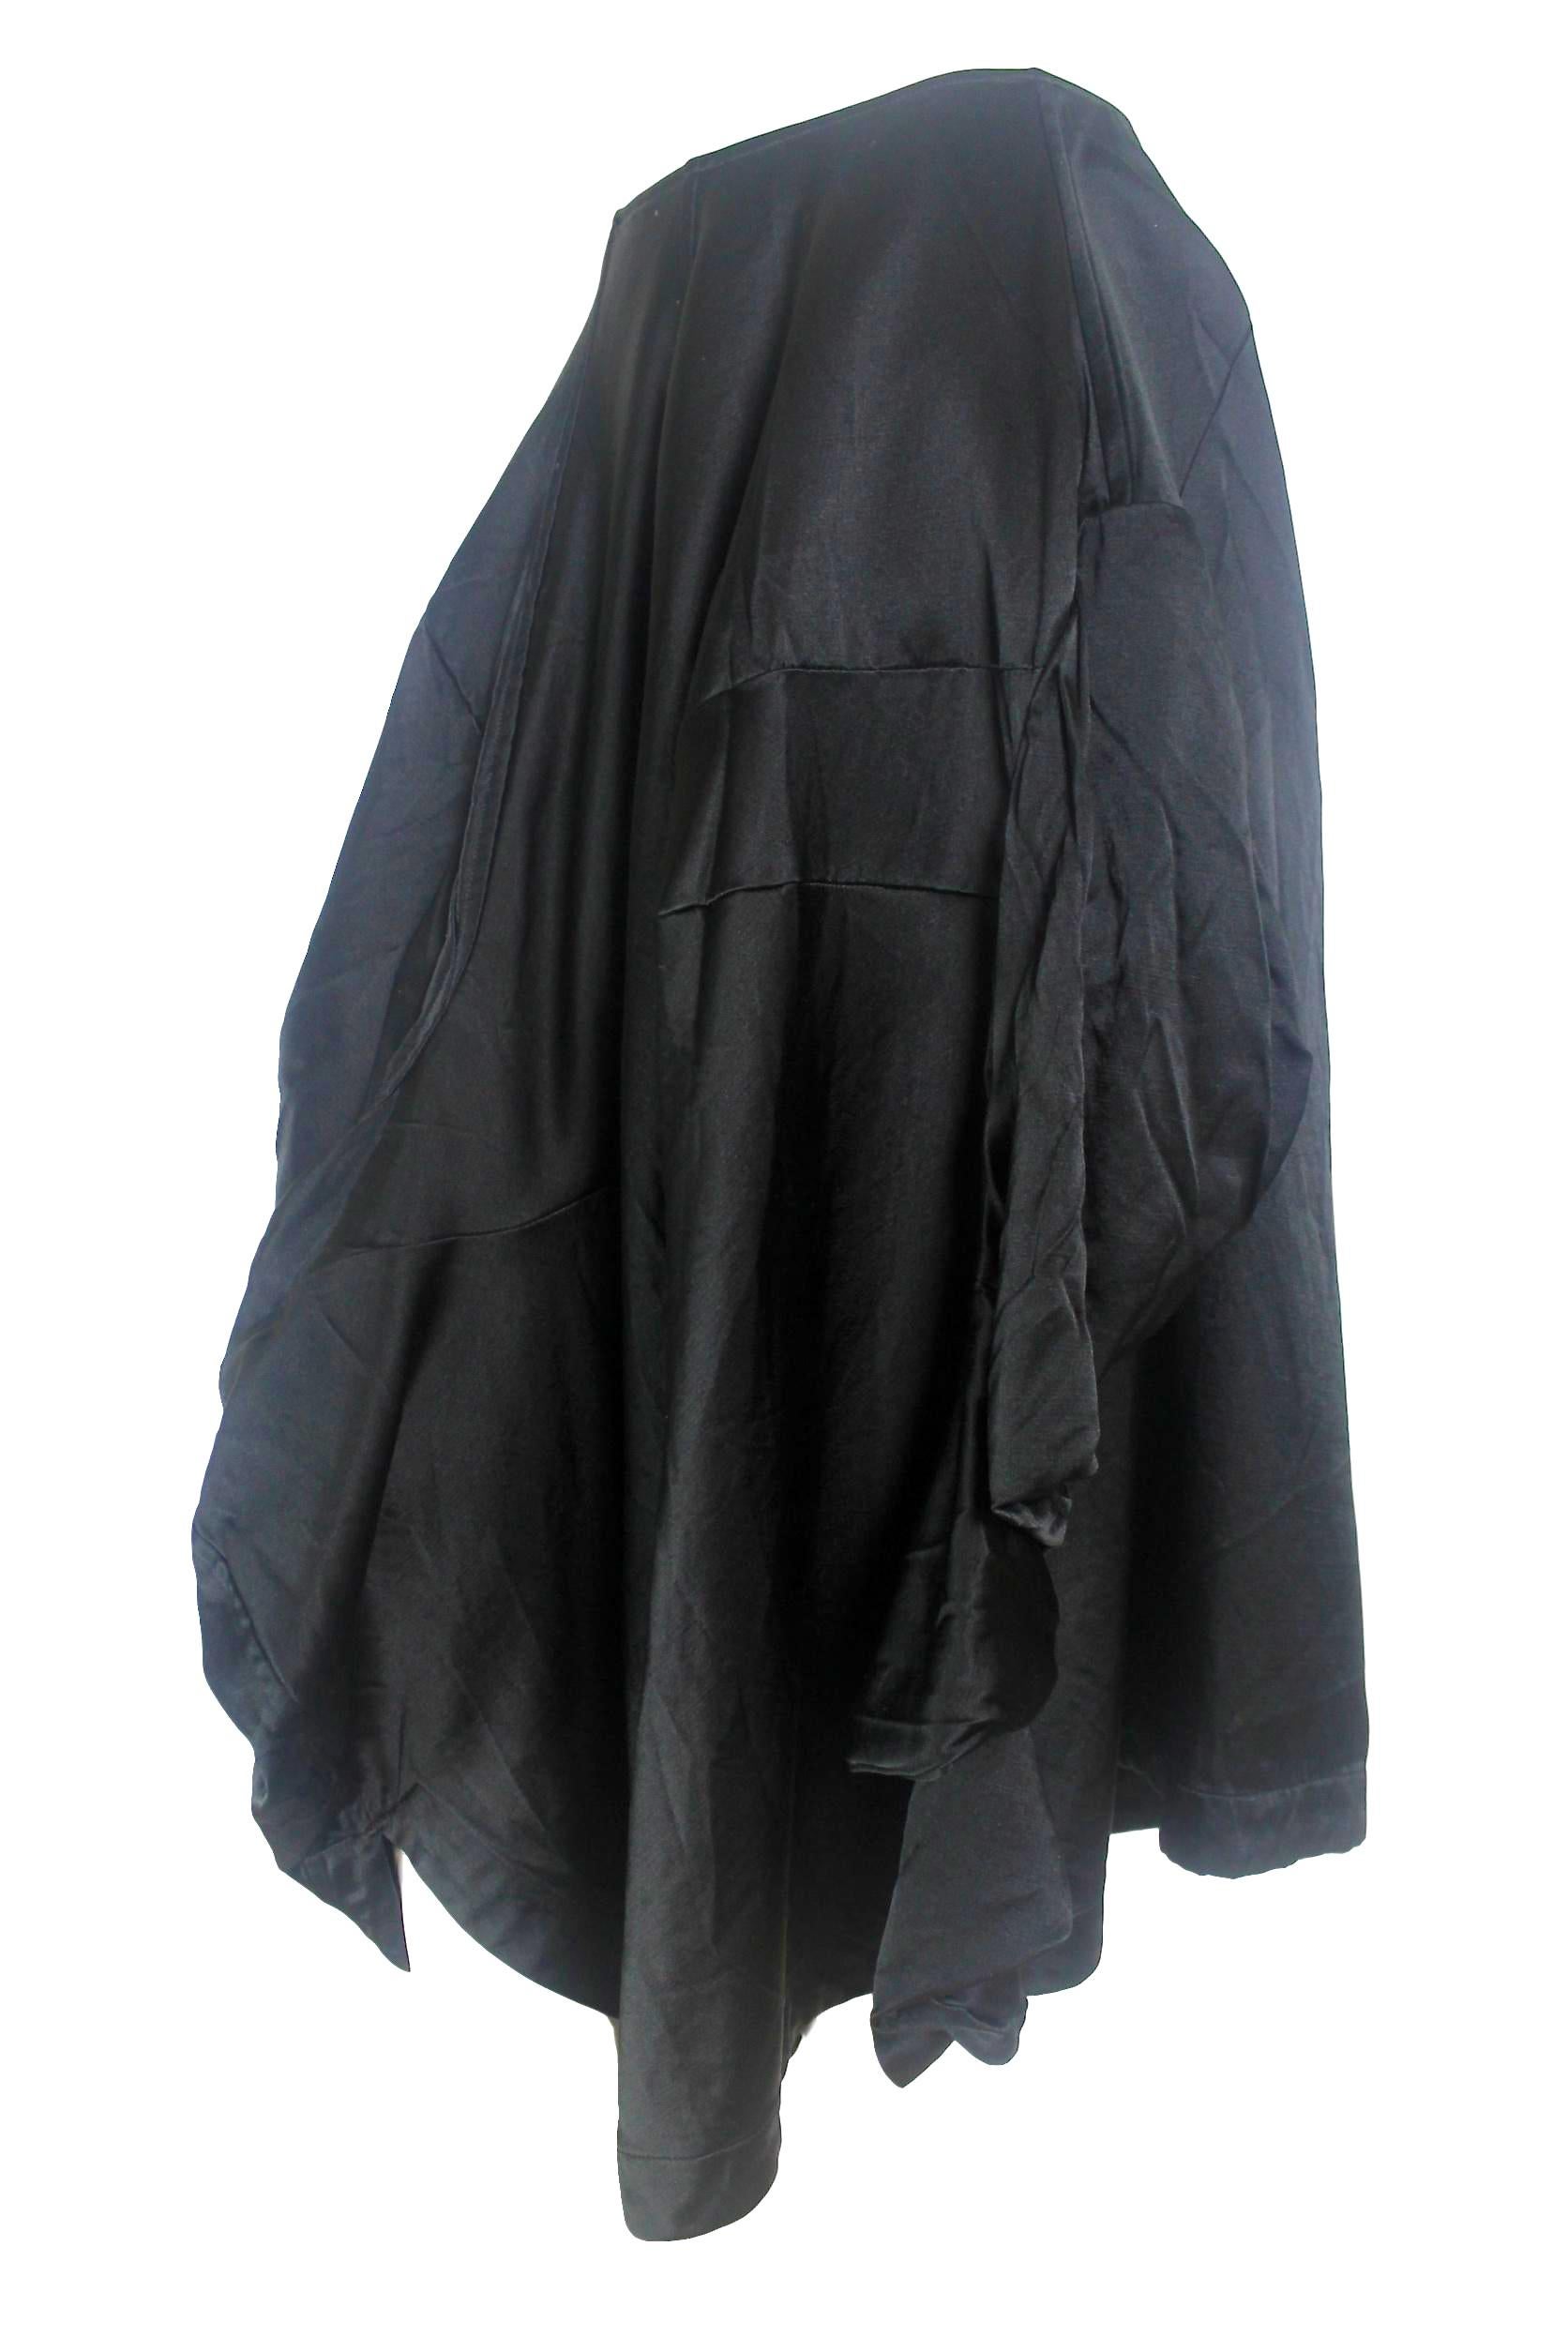 Comme des Garcons Wool/Silk Twisted Sleeve Skirt AD 2004 Dark Romance For Sale 9